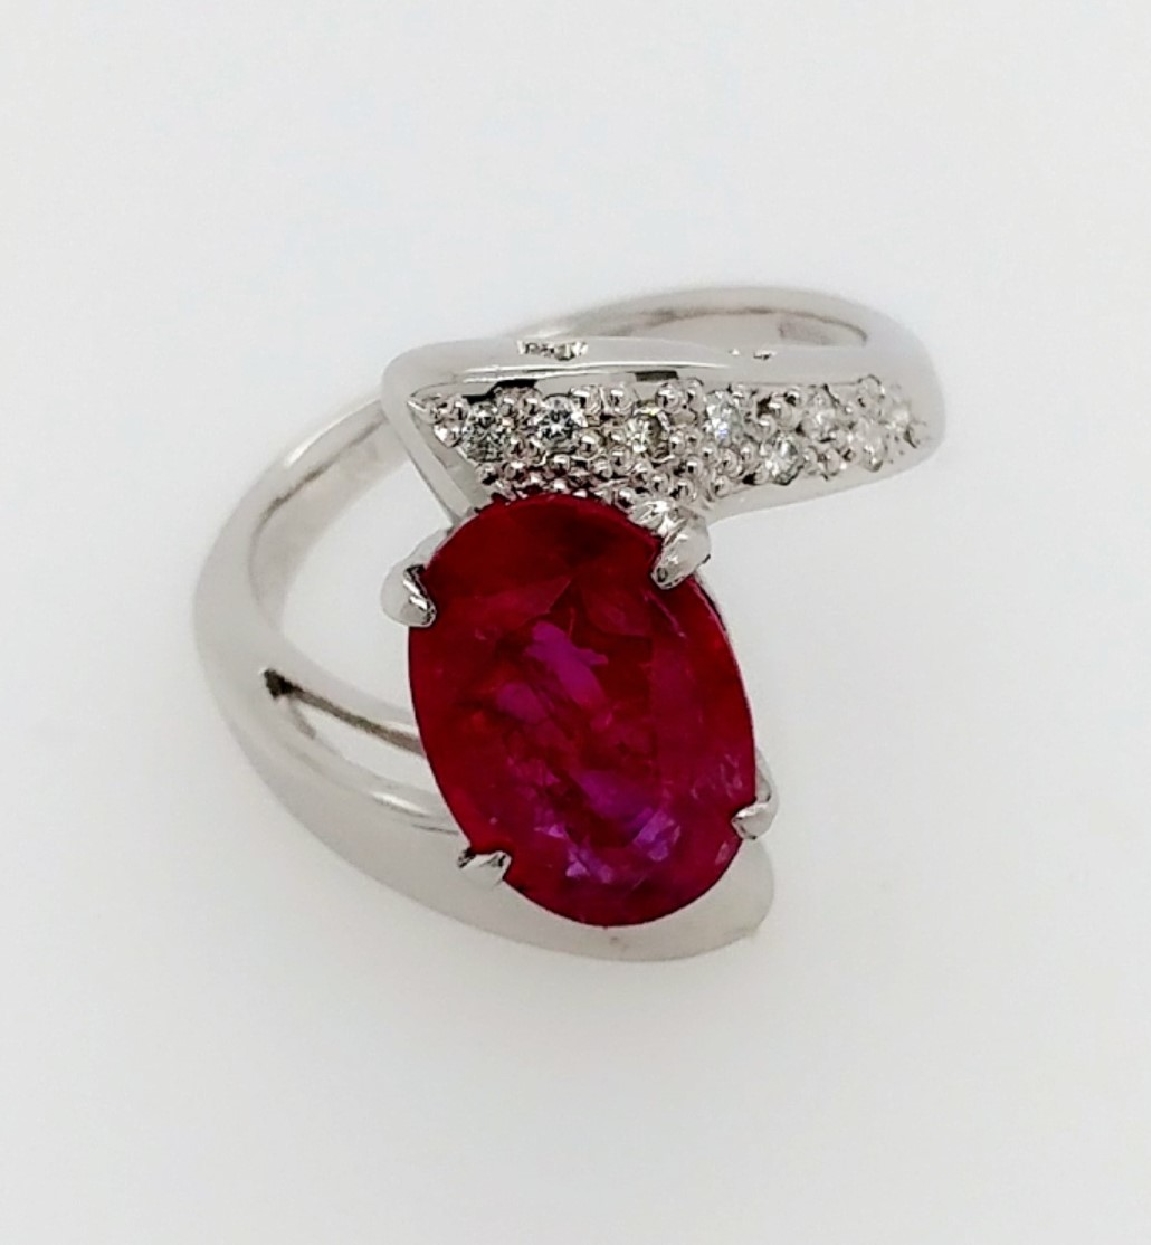 platinum diamond setting with an oval ruby at 2.17 ct
size 6